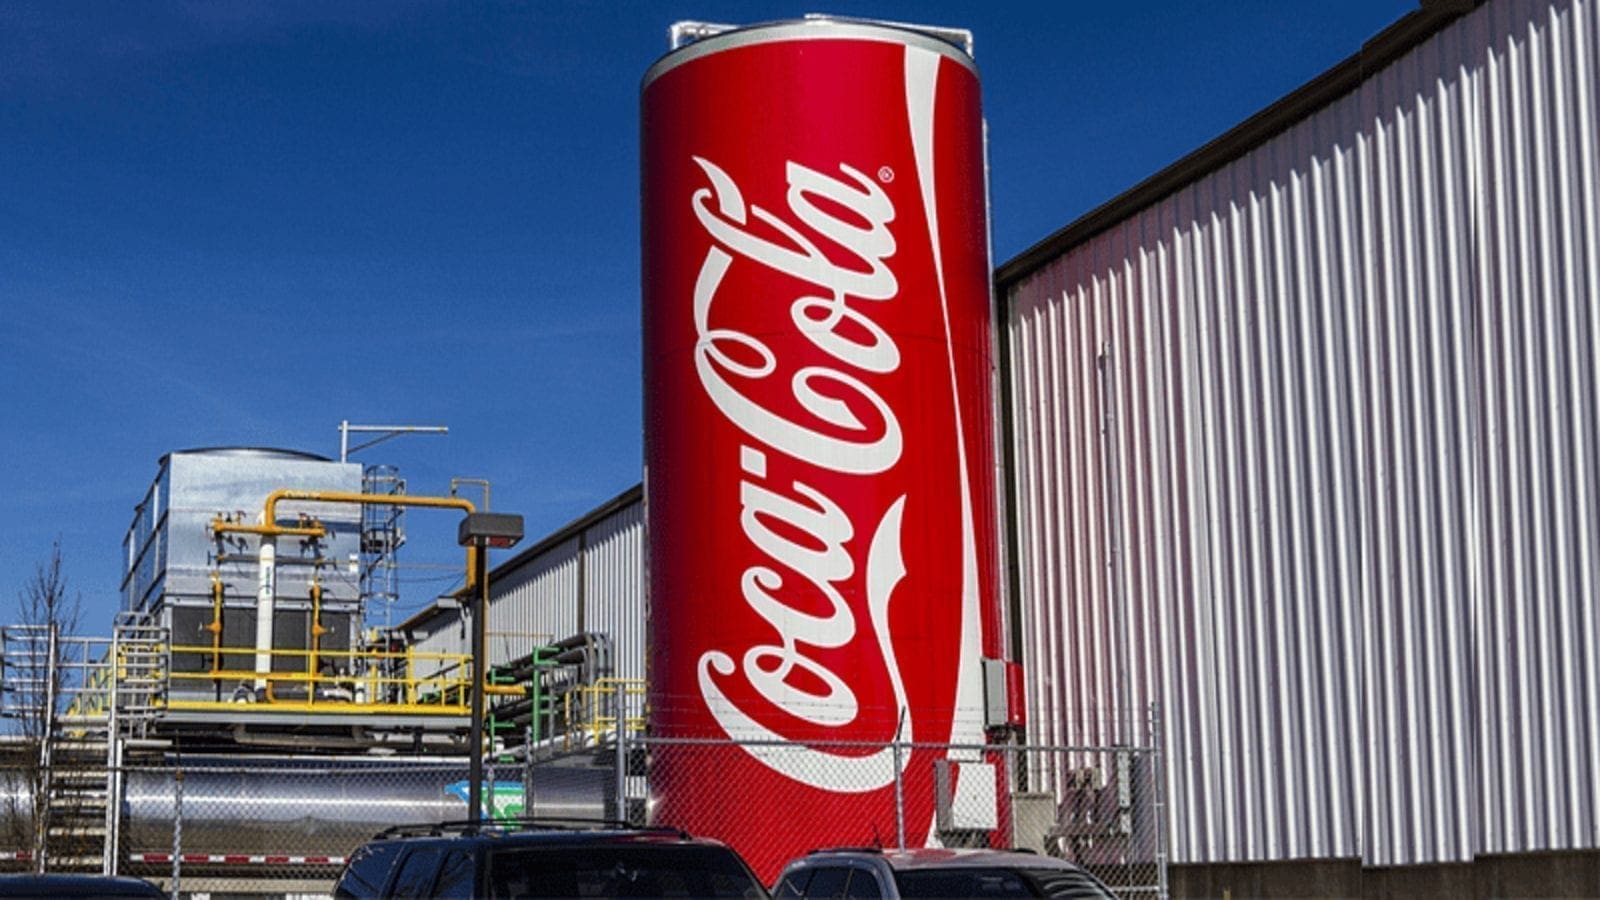 Coca-Cola raises full-year guidance as Q2 revenues jump 42% buoyed by rebounding away-from-home consumption